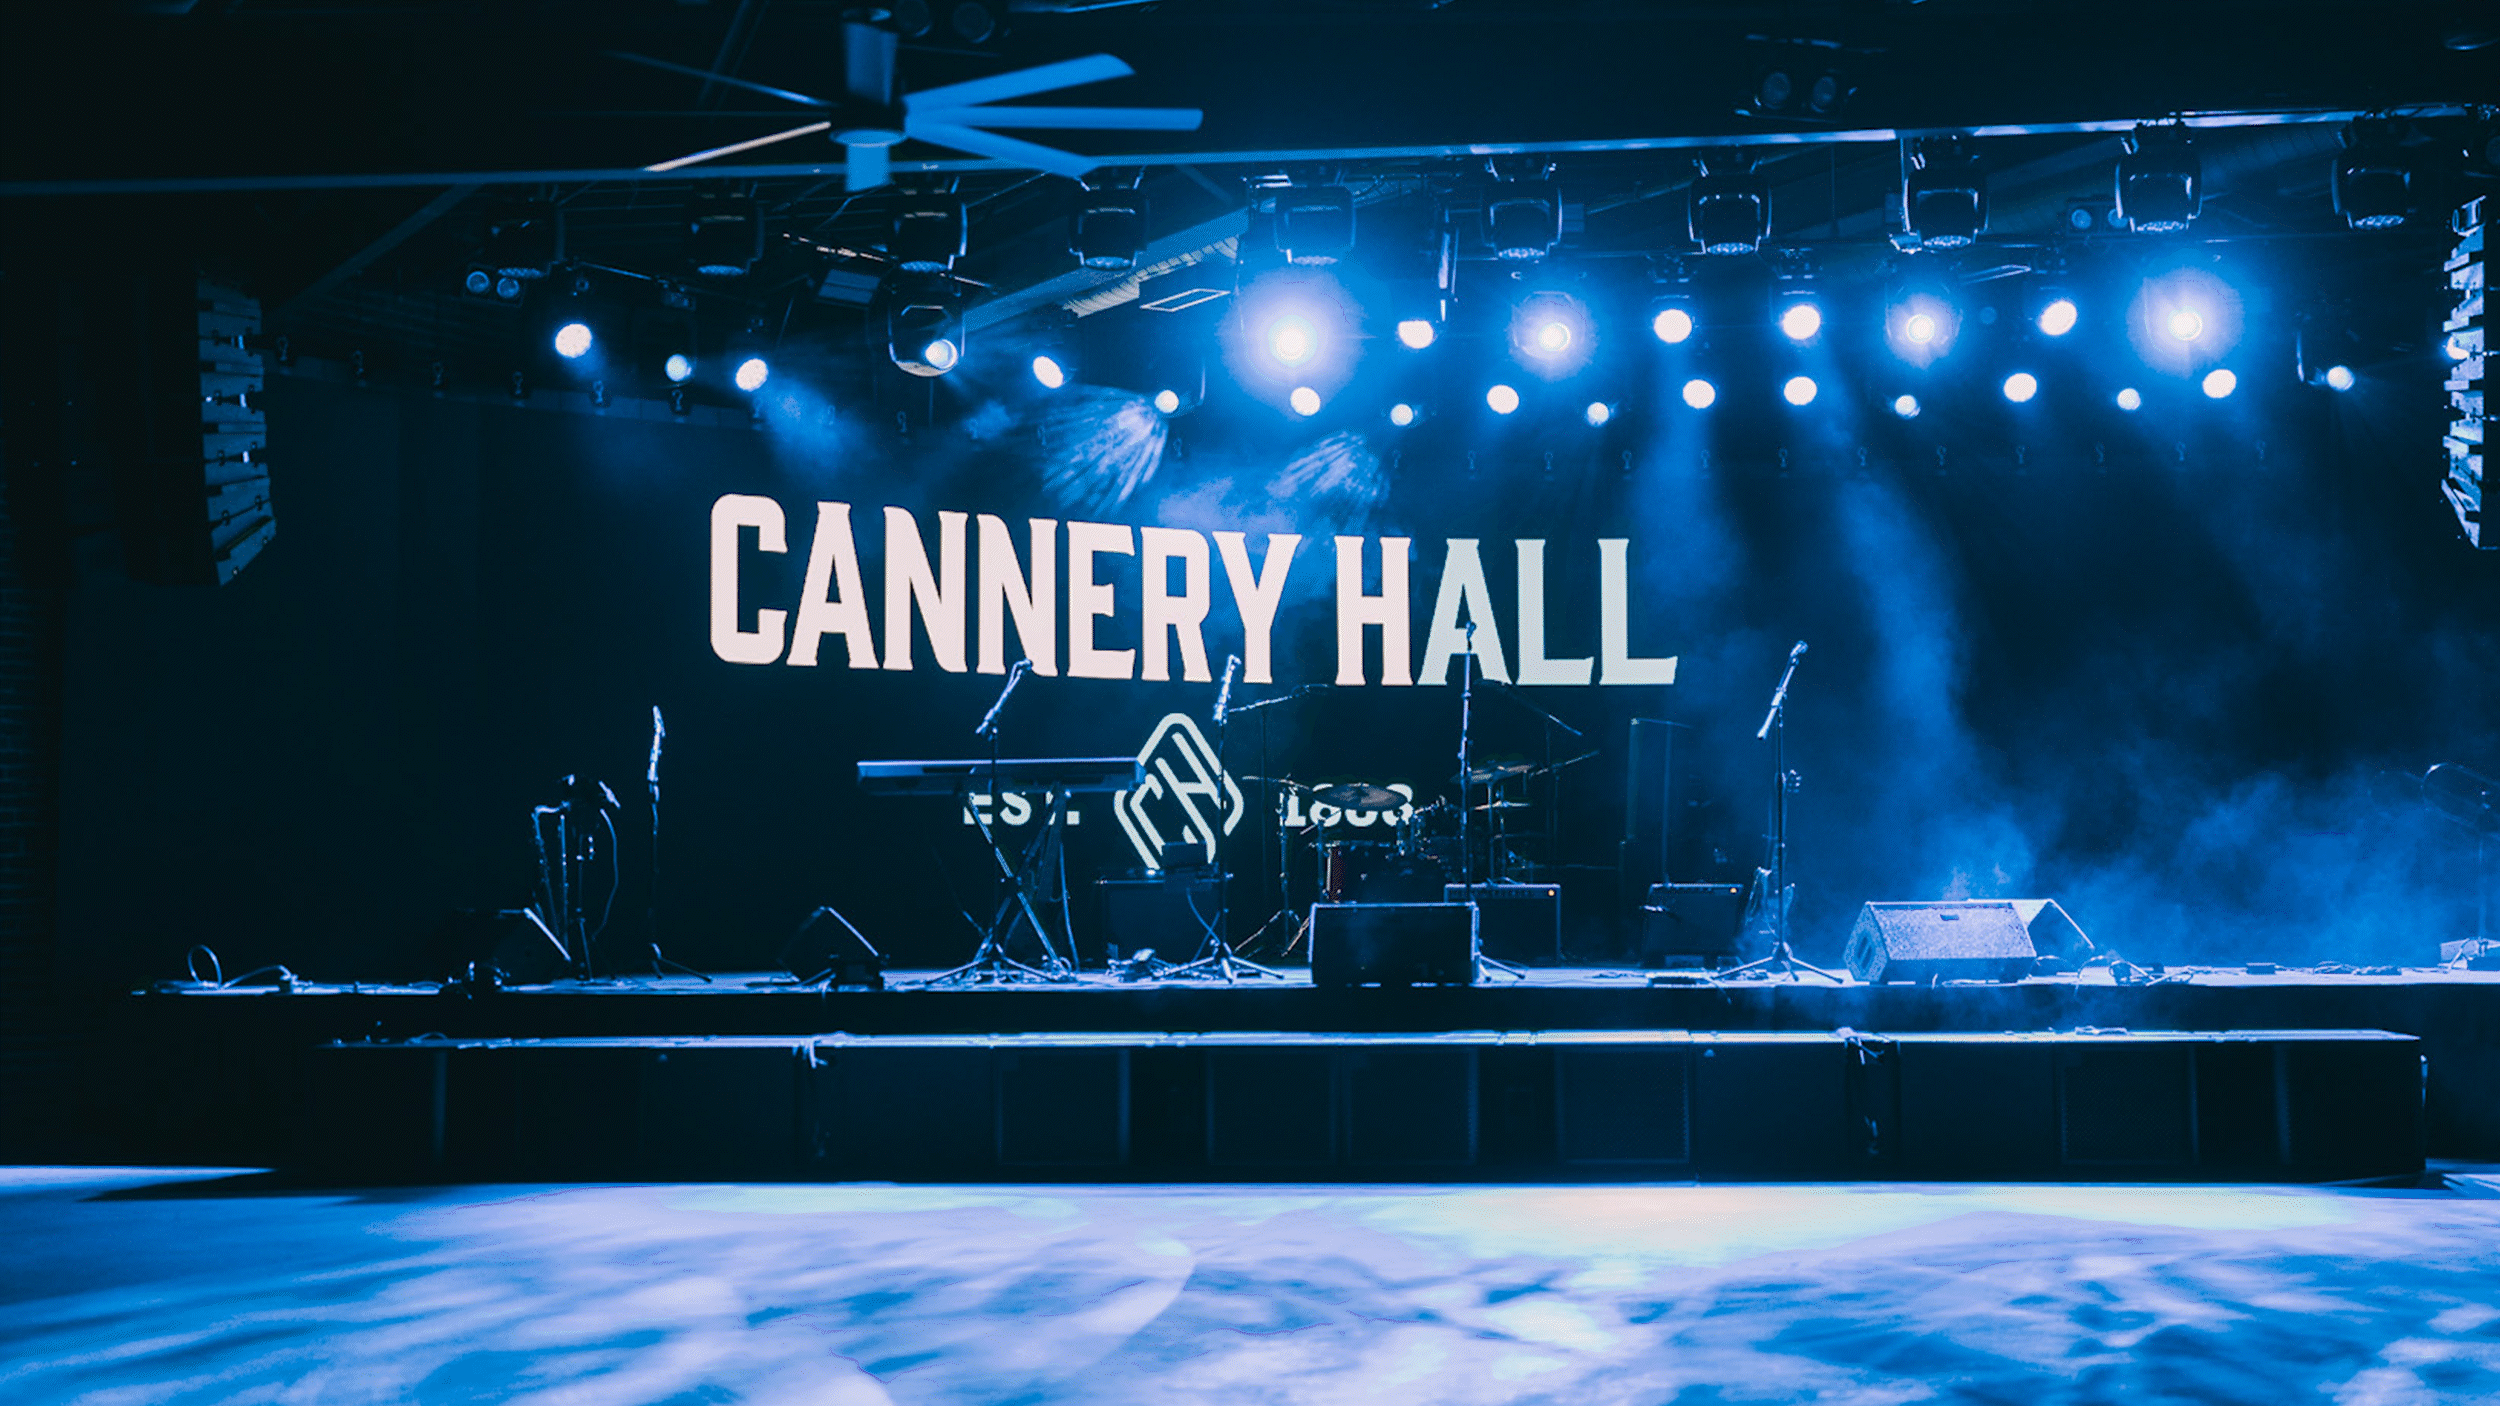 Cannery Hall venue logos used on the MainStage and as signage on location.